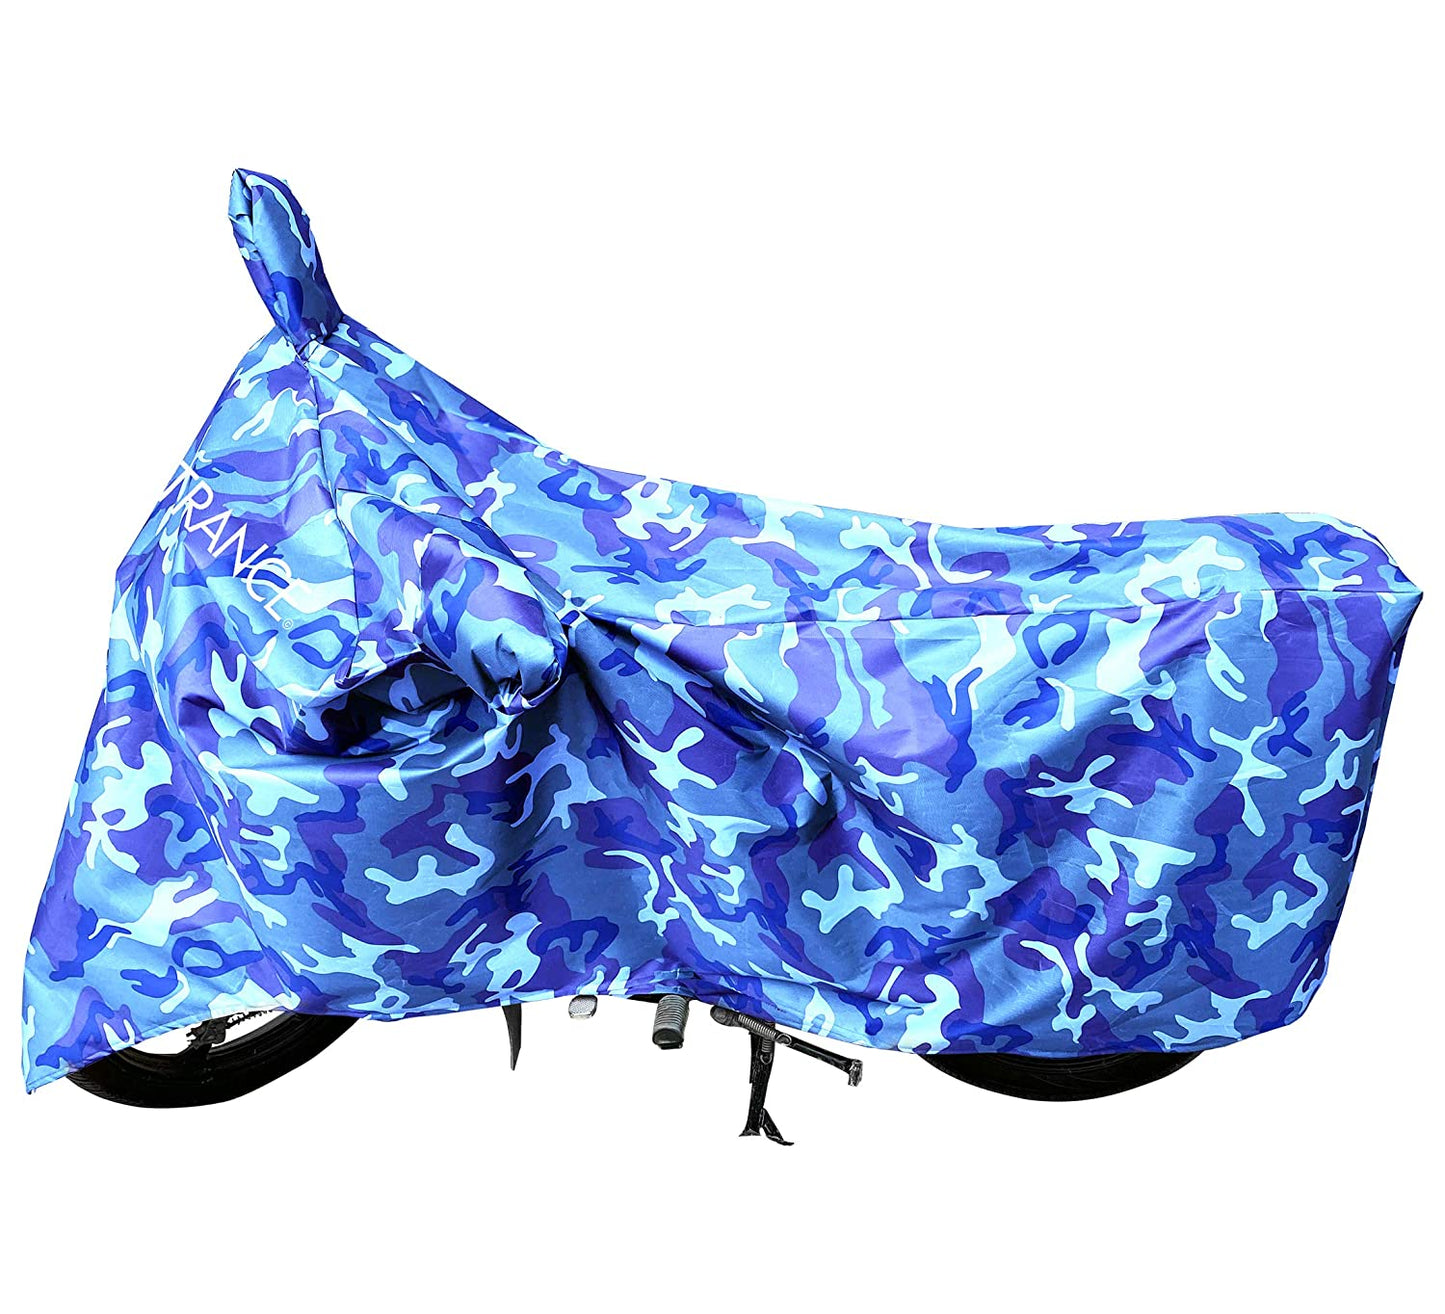 MotoTrance Jungle Bike Body Covers For Honda CB 1000R - Interlock-Stitched Waterproof and Heat Resistant with Mirror Pockets